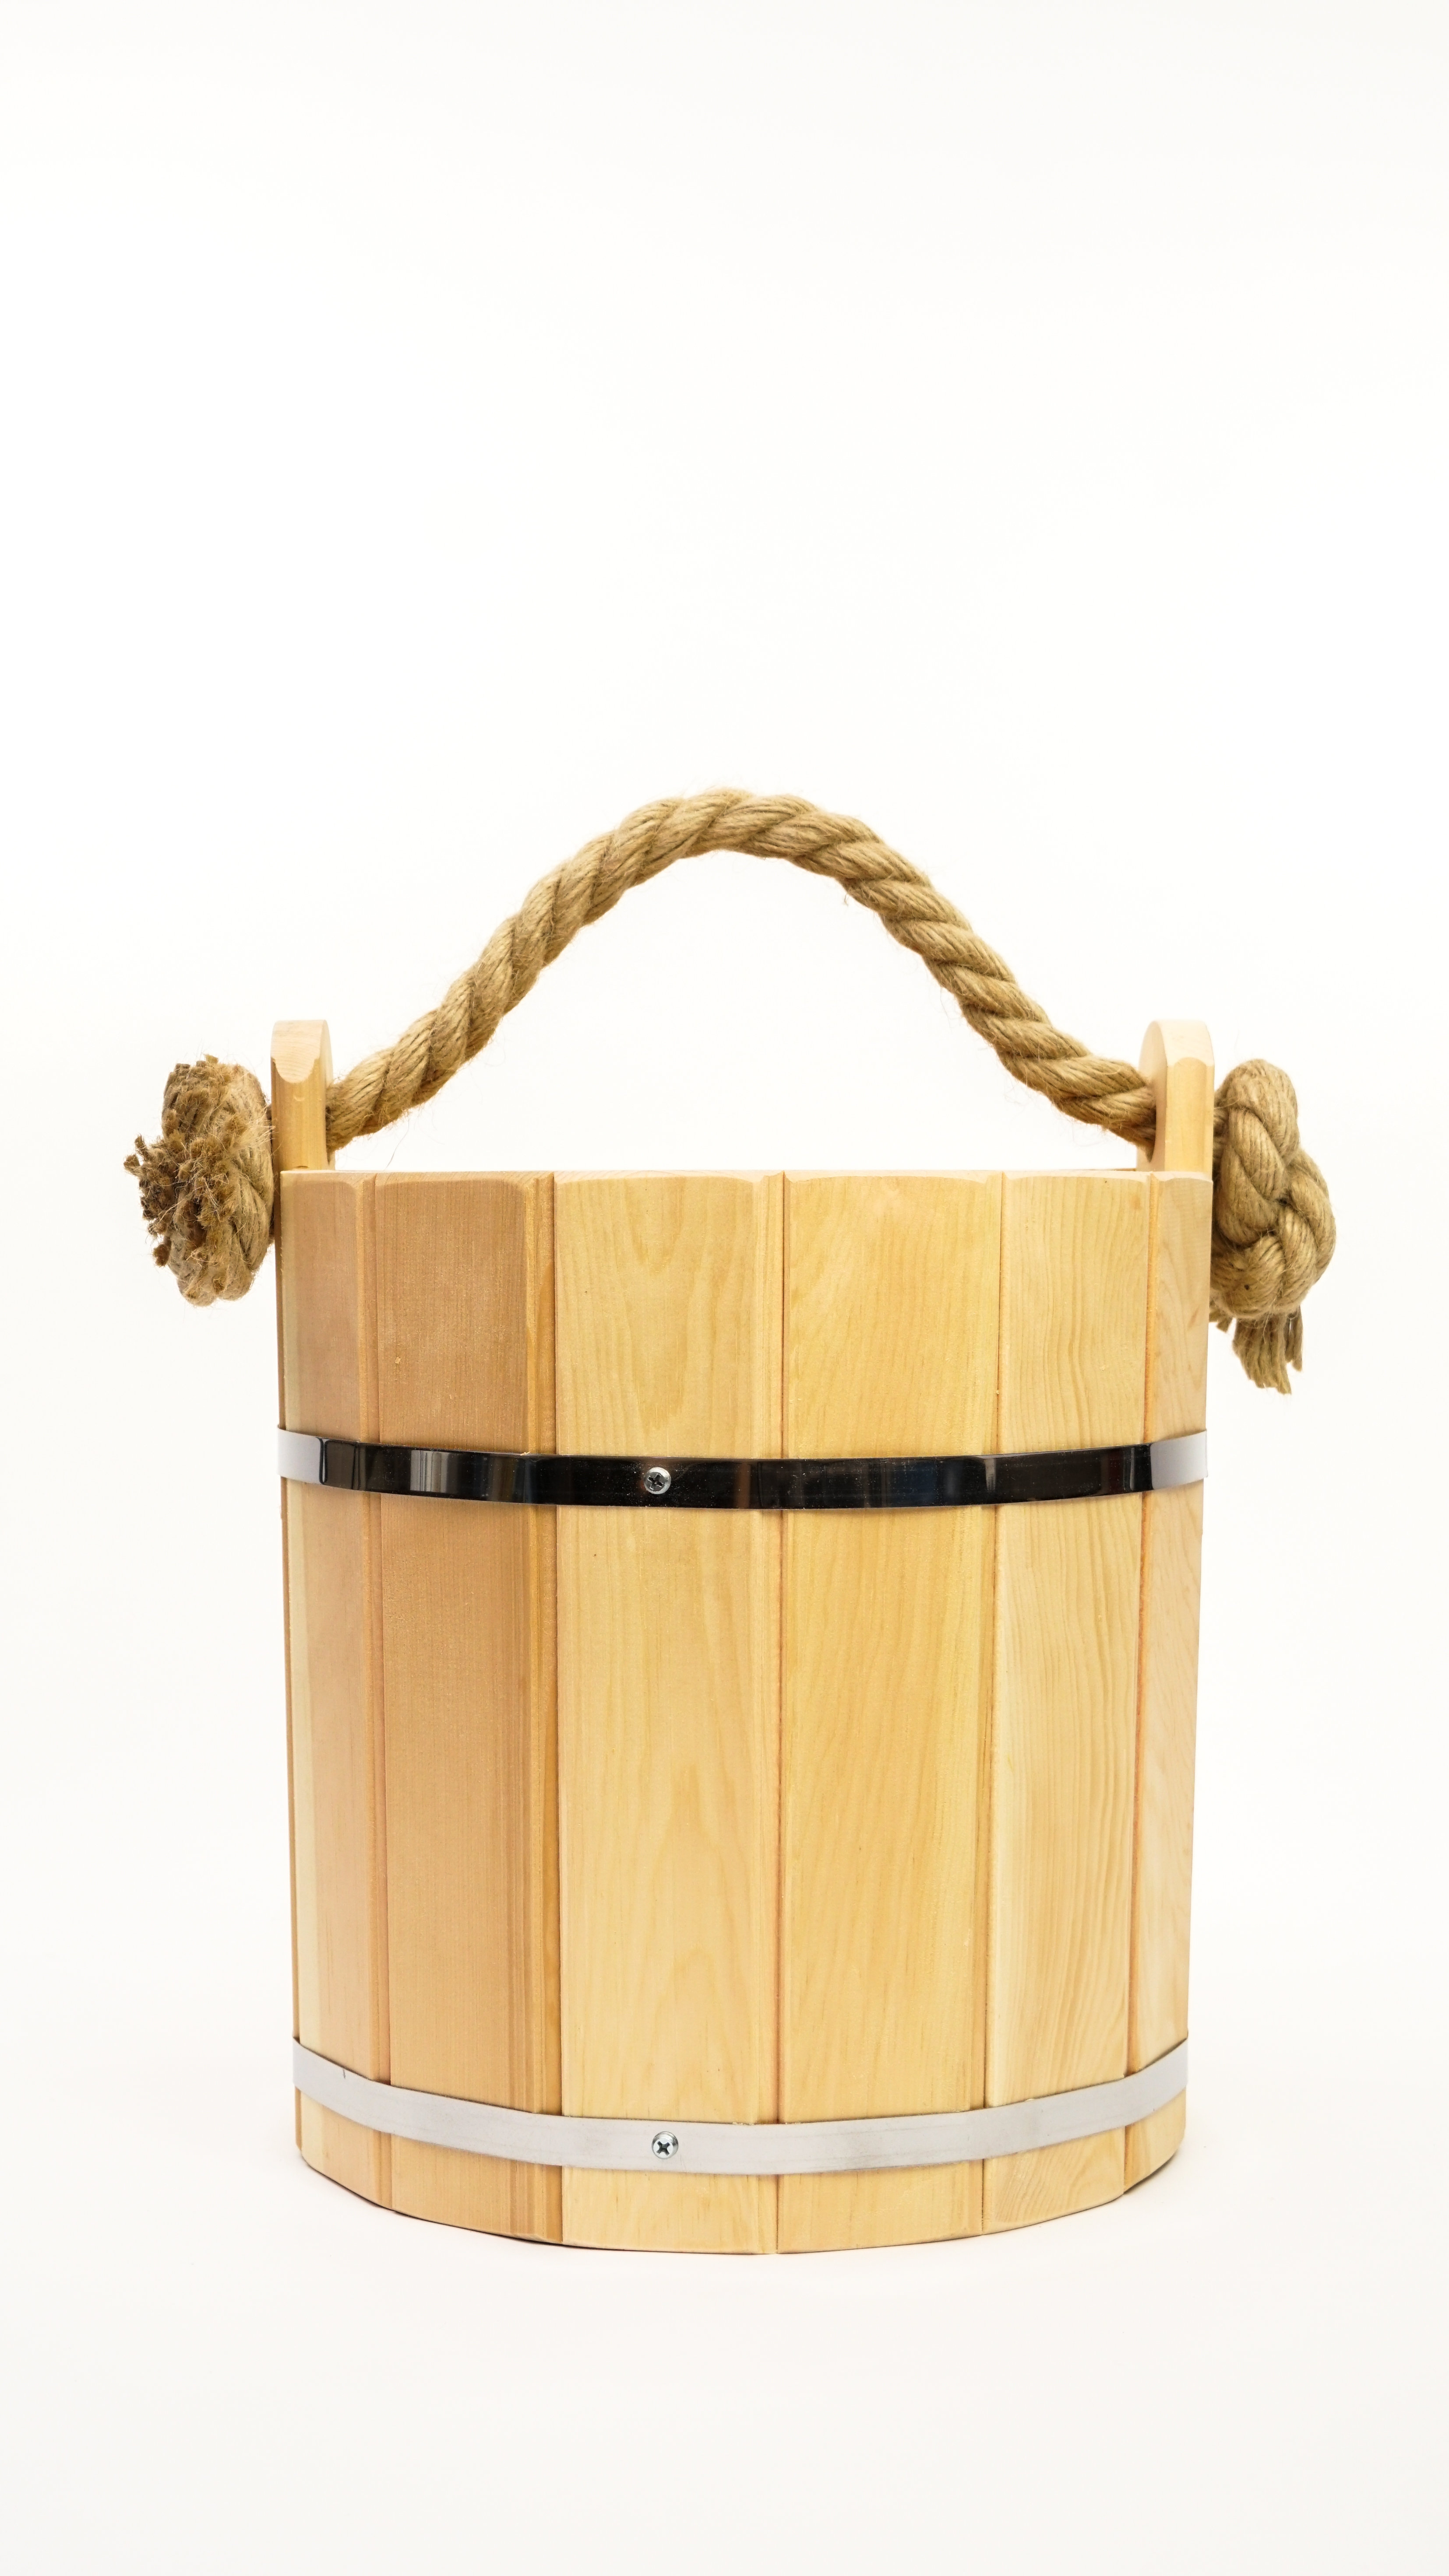 WOODEN BUCKET IN DIAMETER 15 CM WITH CORD AS A HANDLE